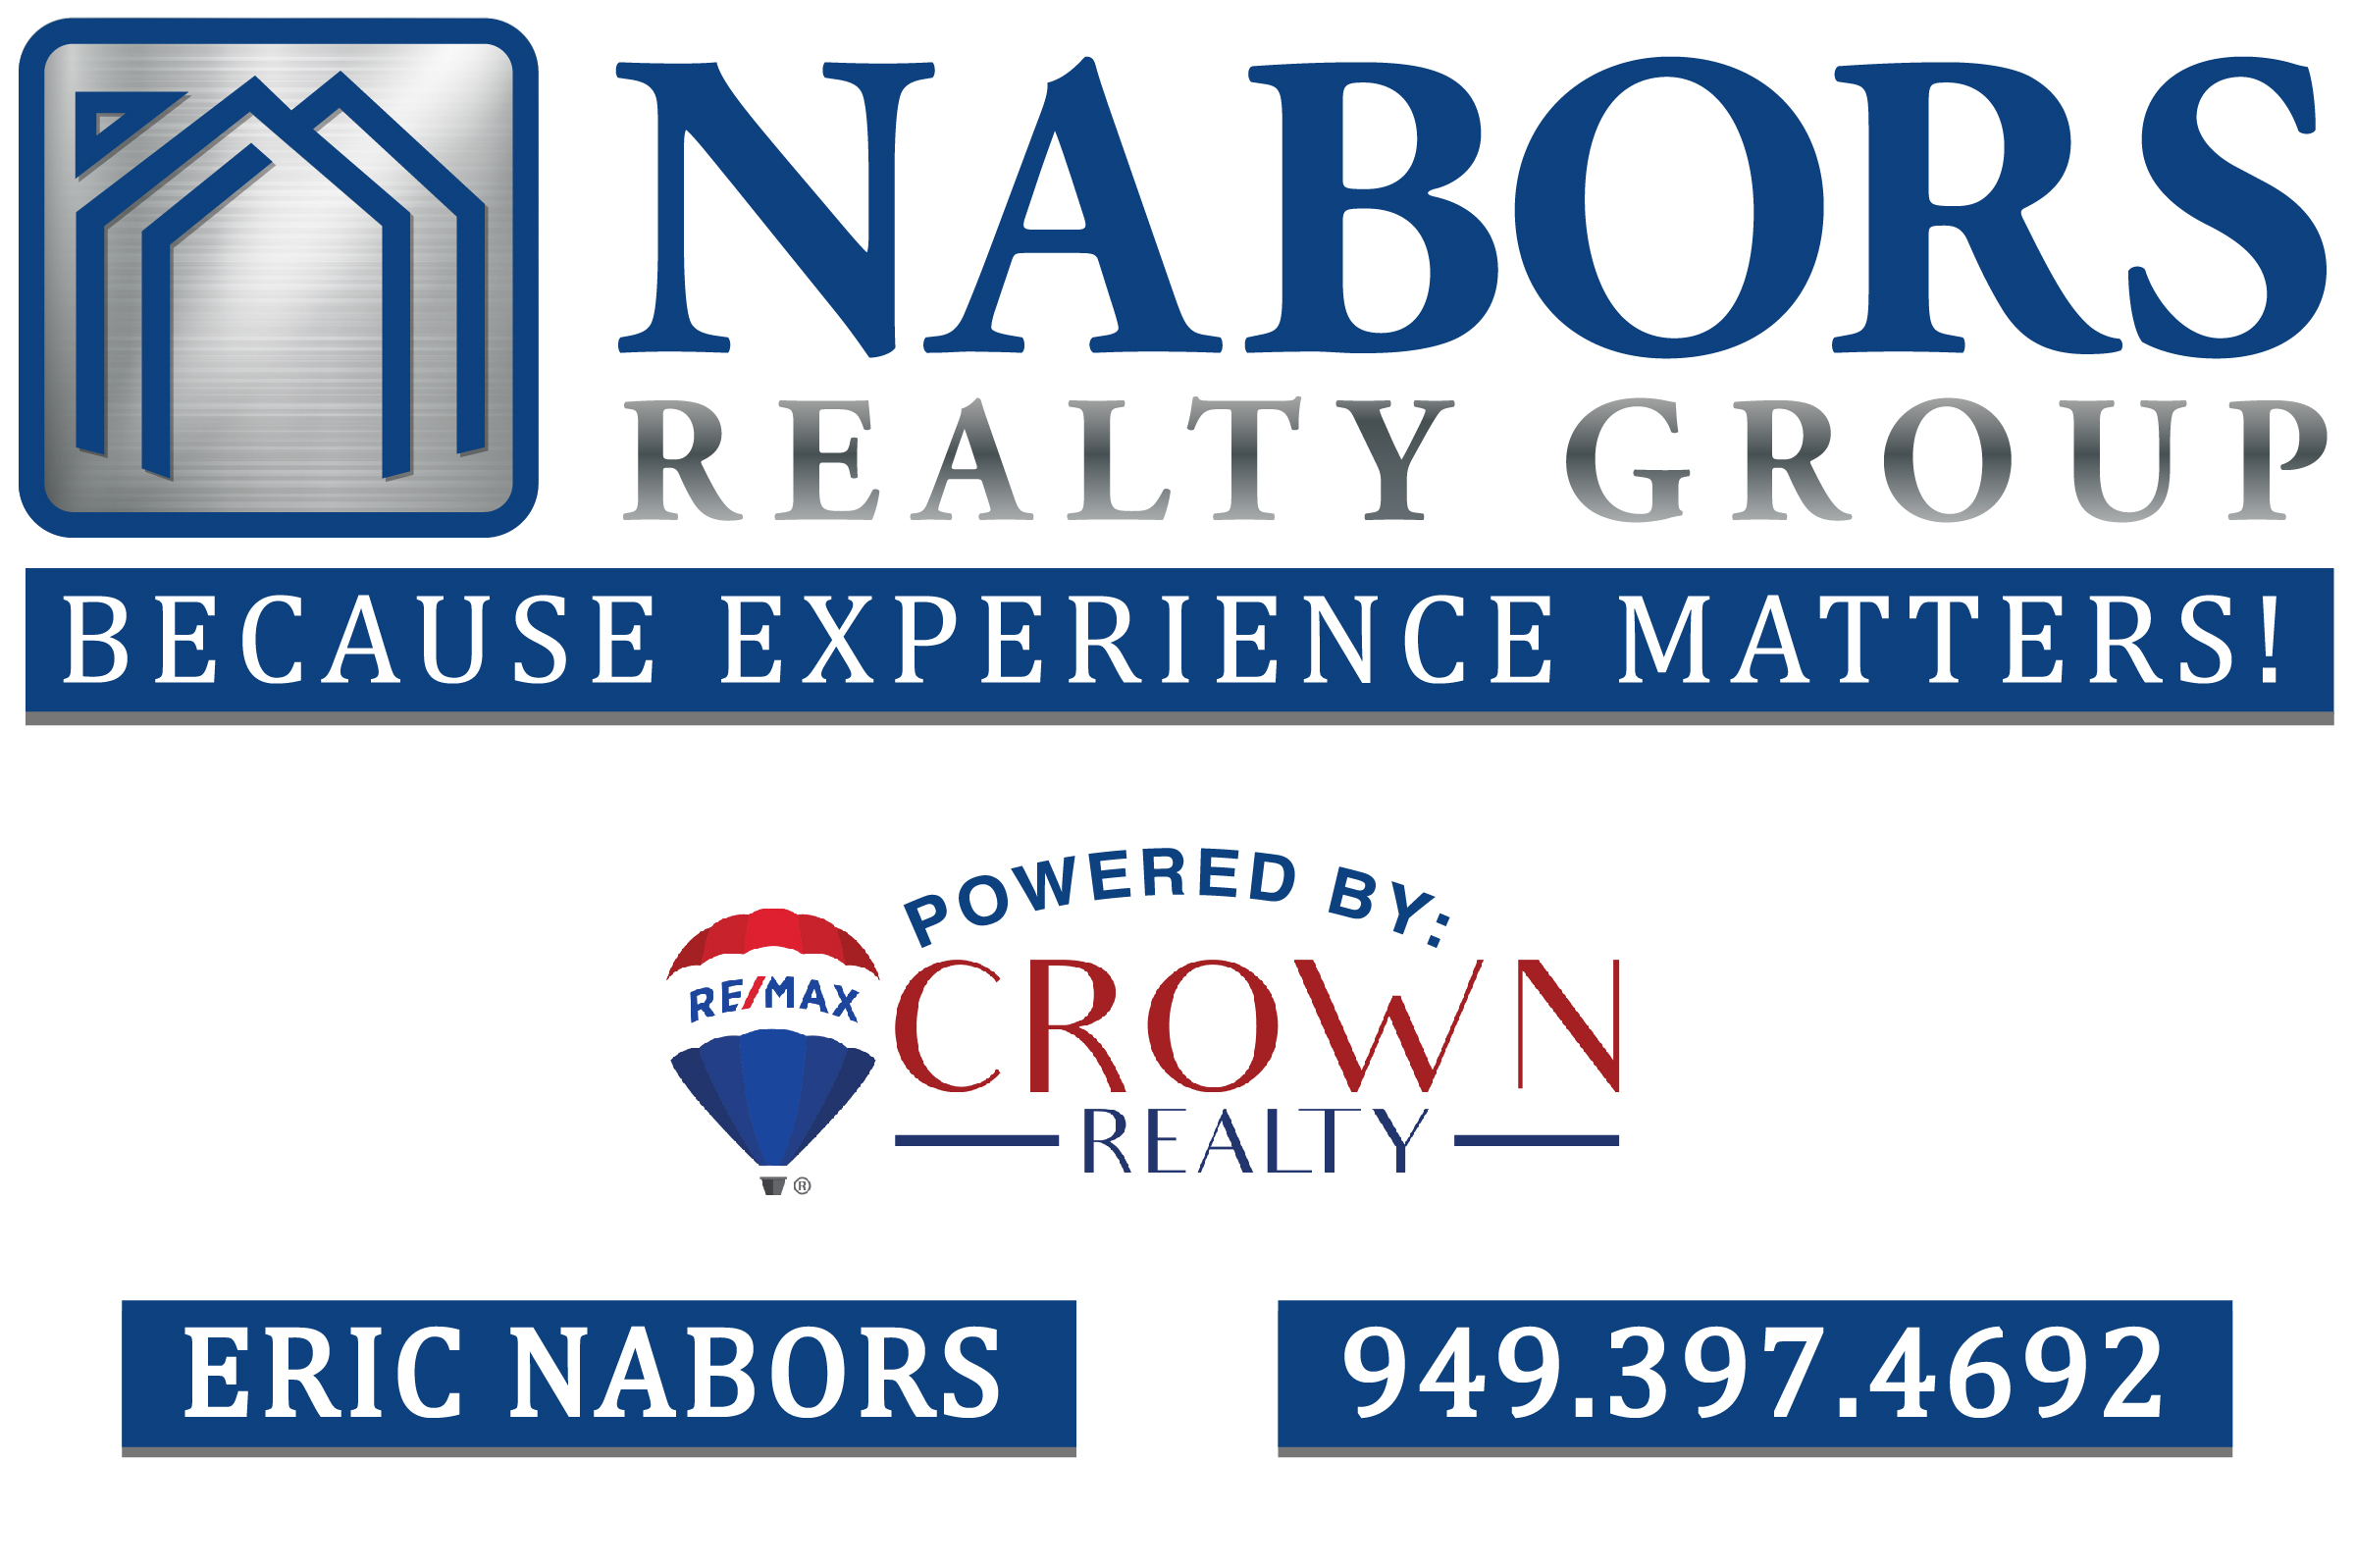 Eric Nabors Real Estate For Sale Signs